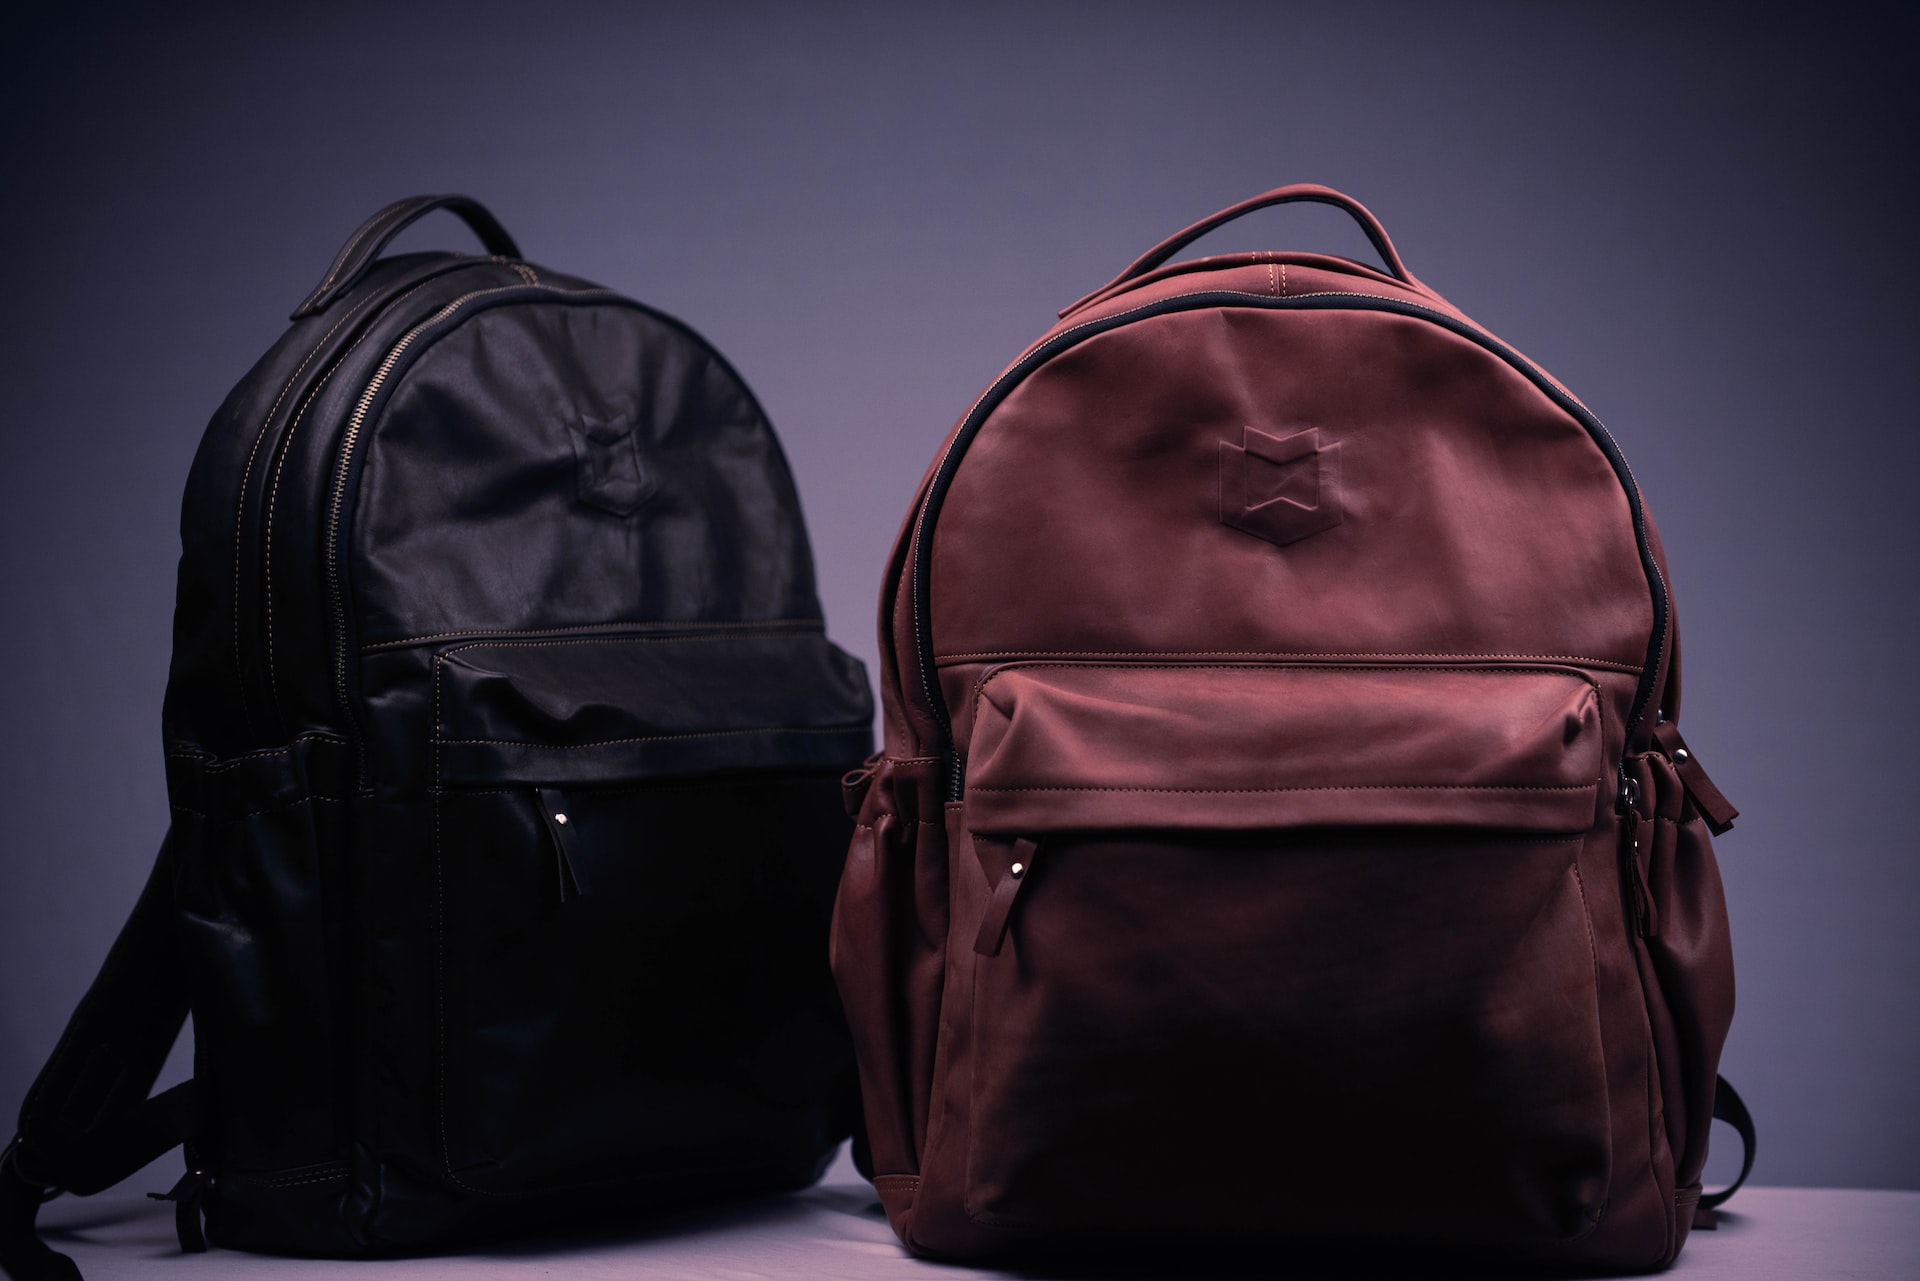 Choosing the Perfect School Bag: A Guide for Parents and Students